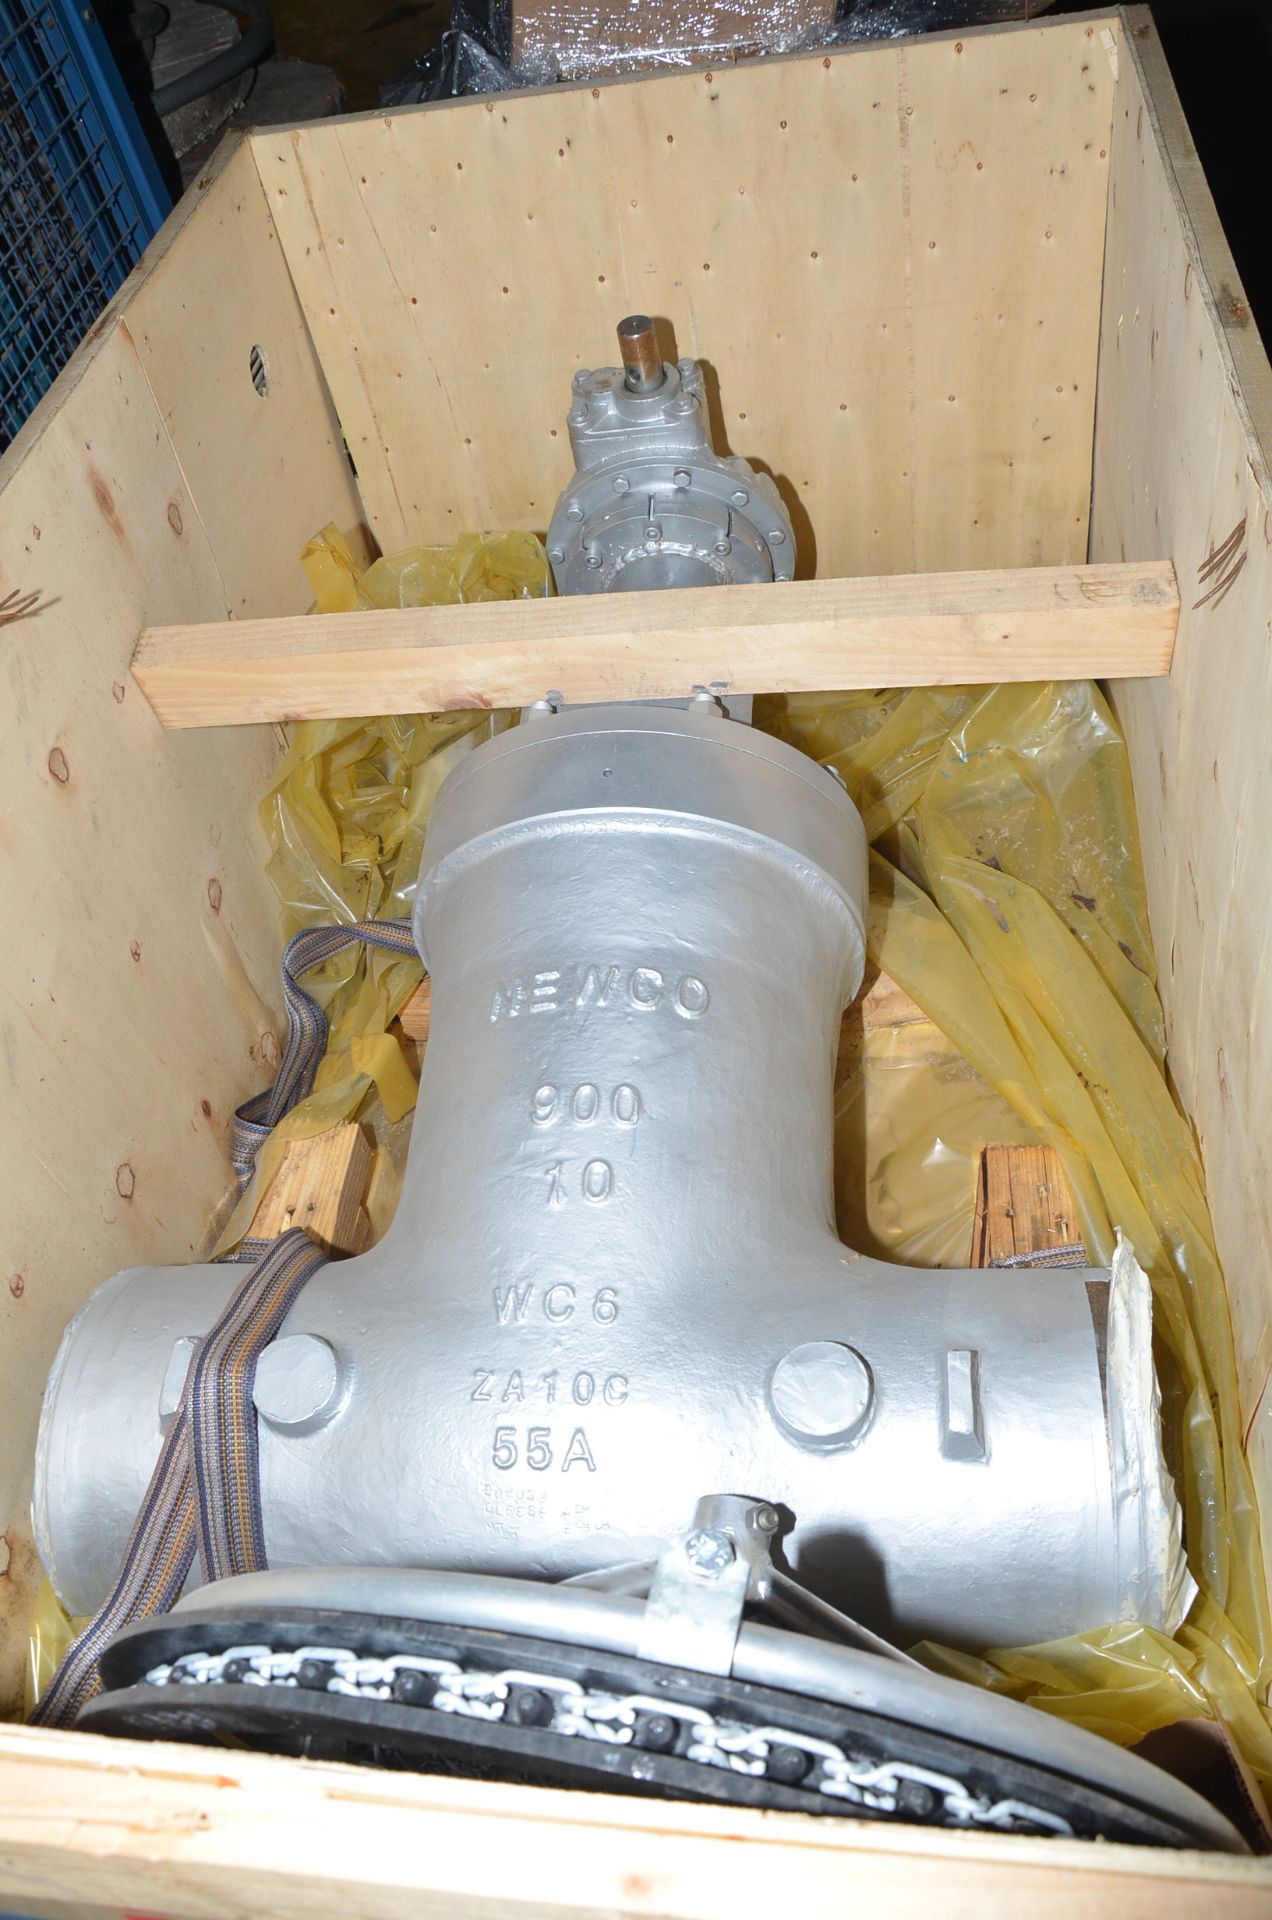 NEWCO 900-10WC6 HIGH-PRESSURE STEAM VALVE WITH 2250PSI@100DEGF, S/N: N/A (BRAND NEW IN BOX) [RIGGING - Image 3 of 4